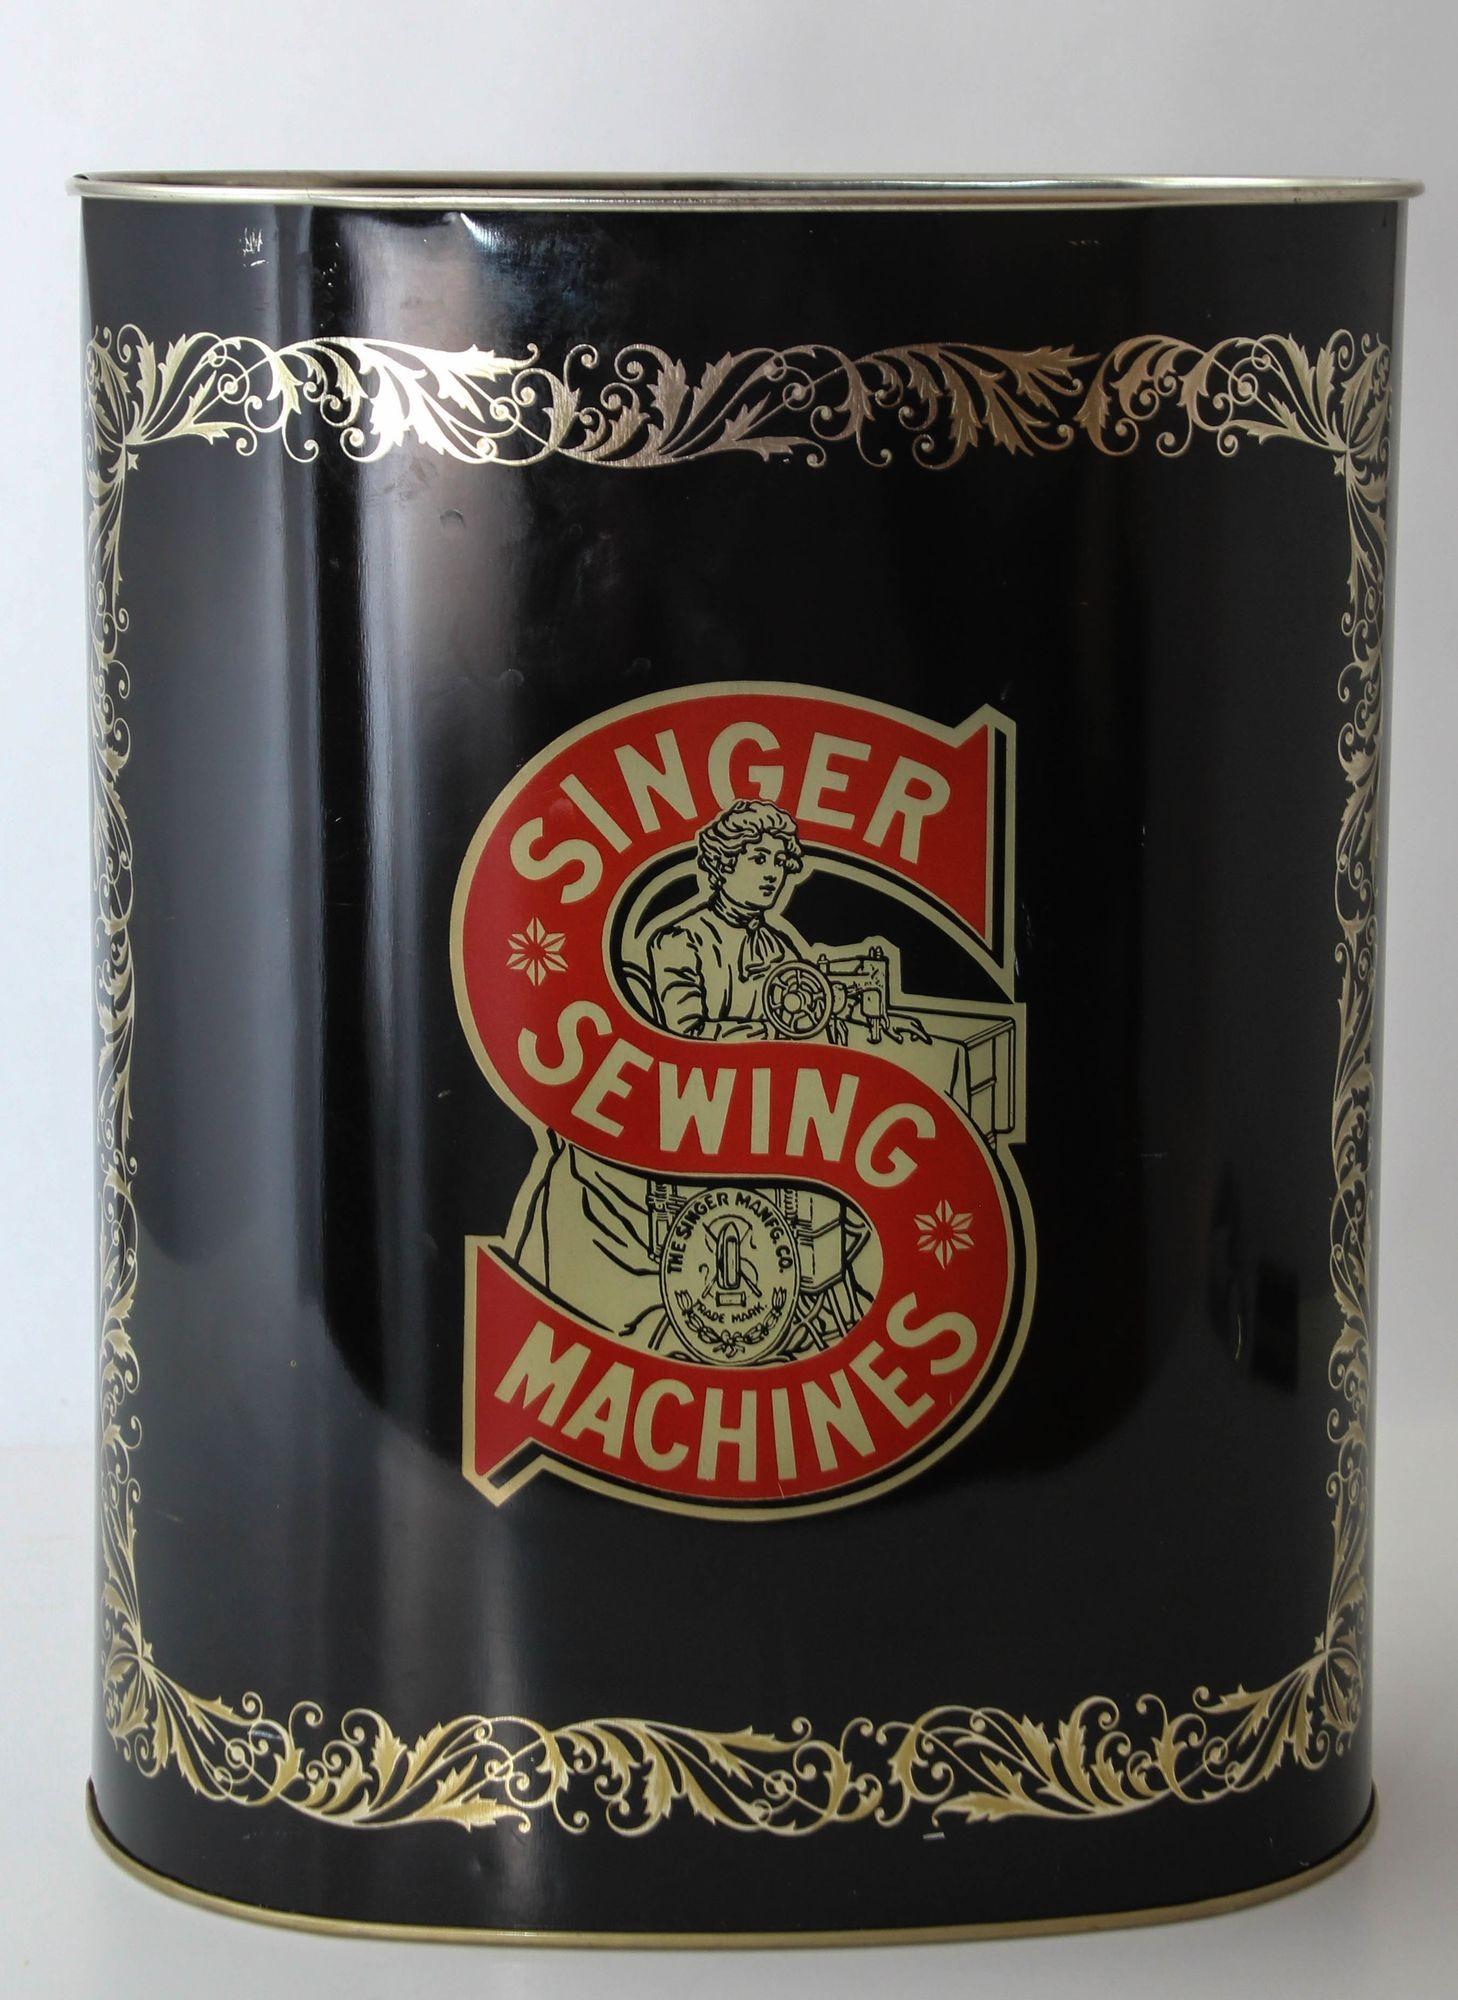 Industrial Singer Sewing Machine Tin Waste Paper Bin Basket by Cheinco Made in USA